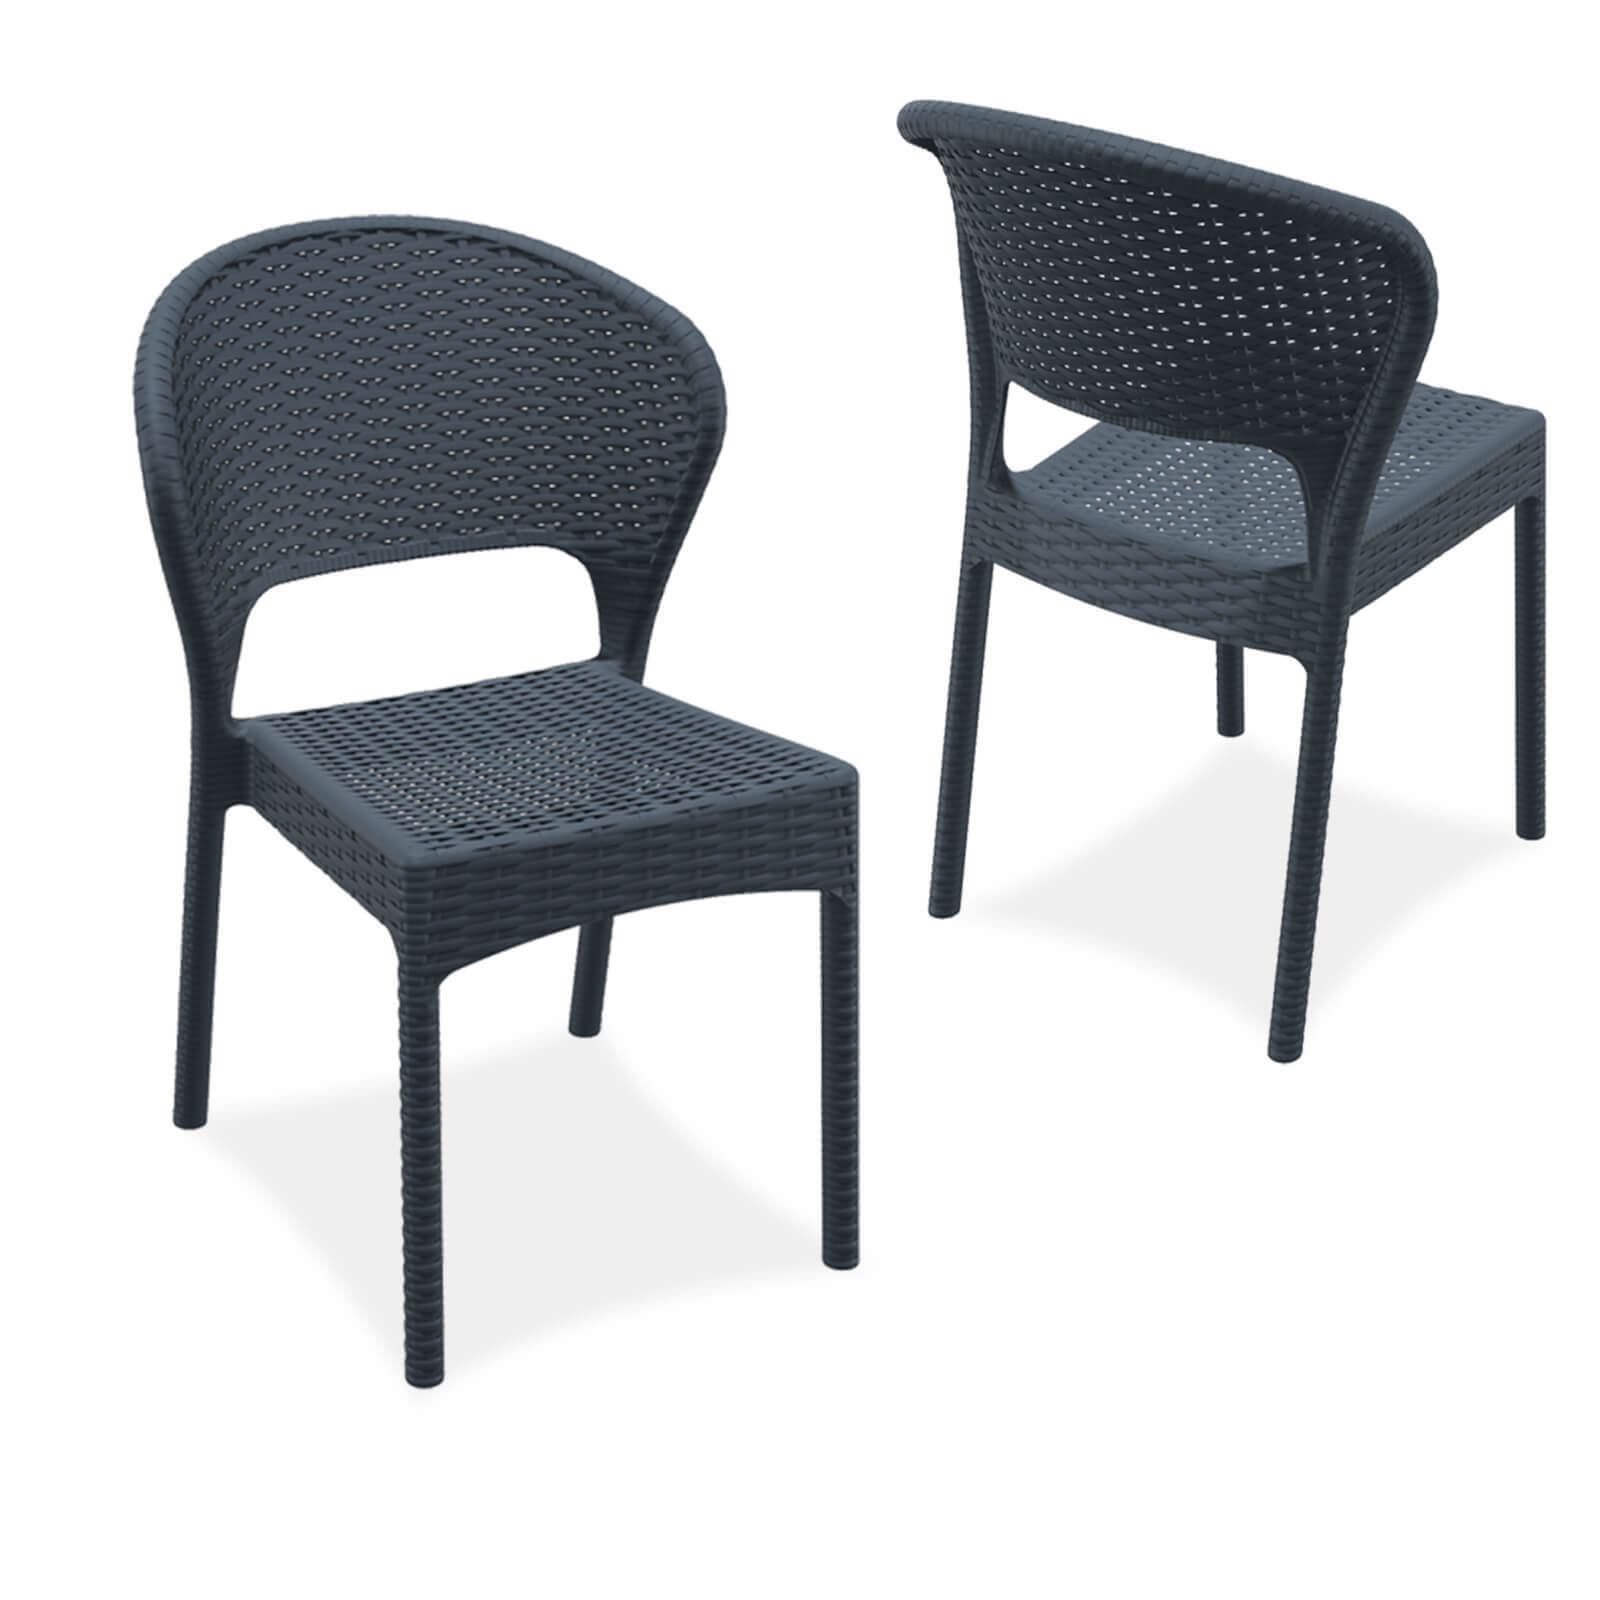 Clovelly | Coastal, Stackable, Plastic Outdoor Dining Chairs | Set Of 2 | Dark Grey